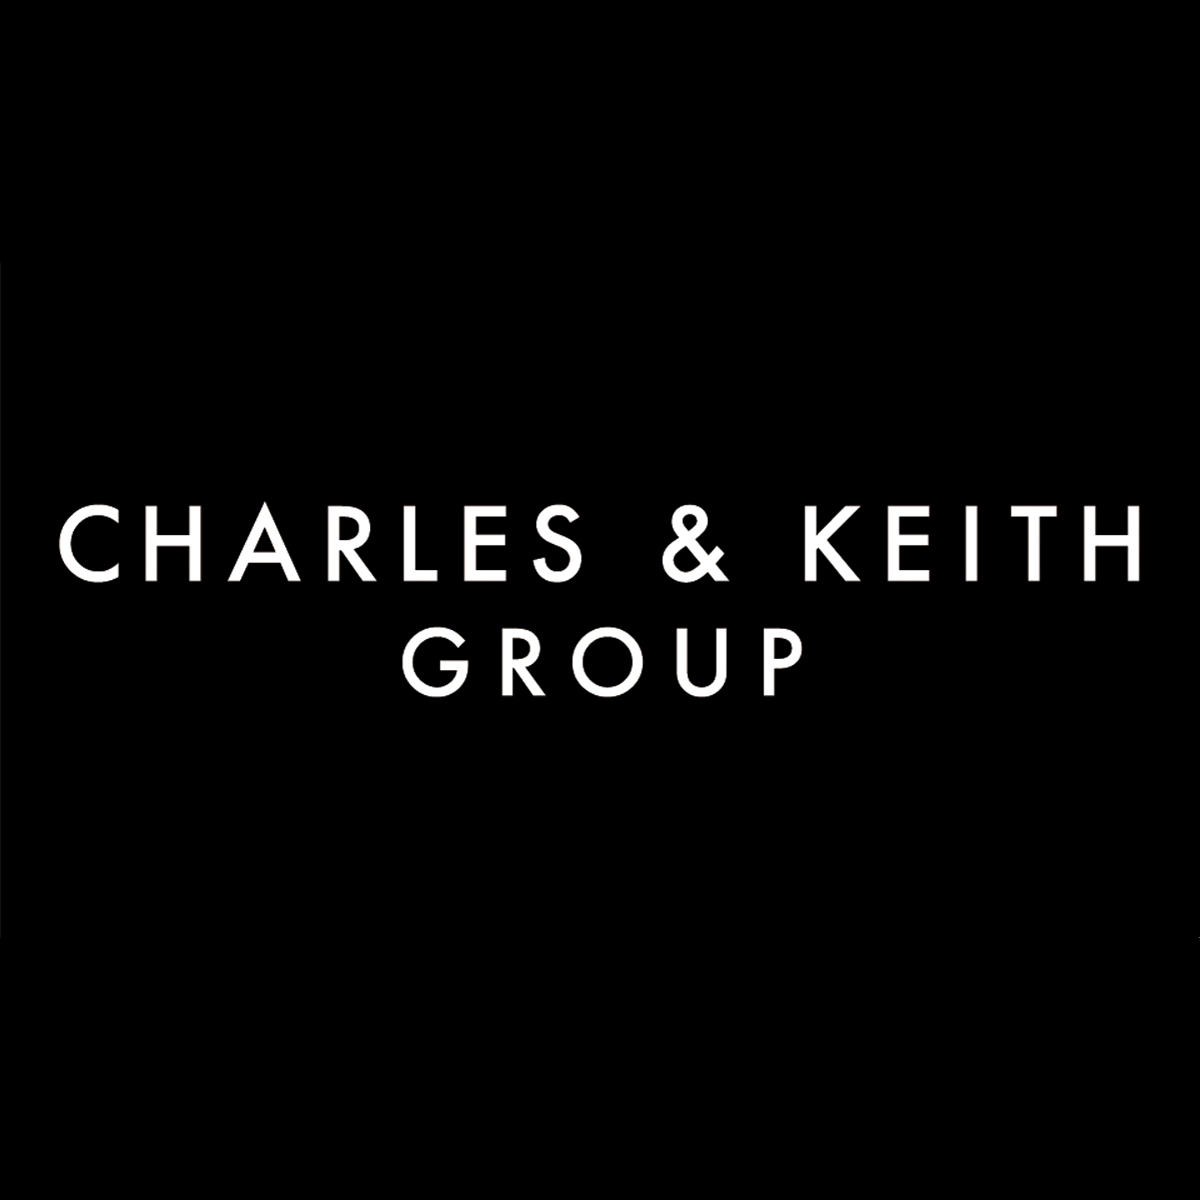 Product Care  CHARLES & KEITH Group